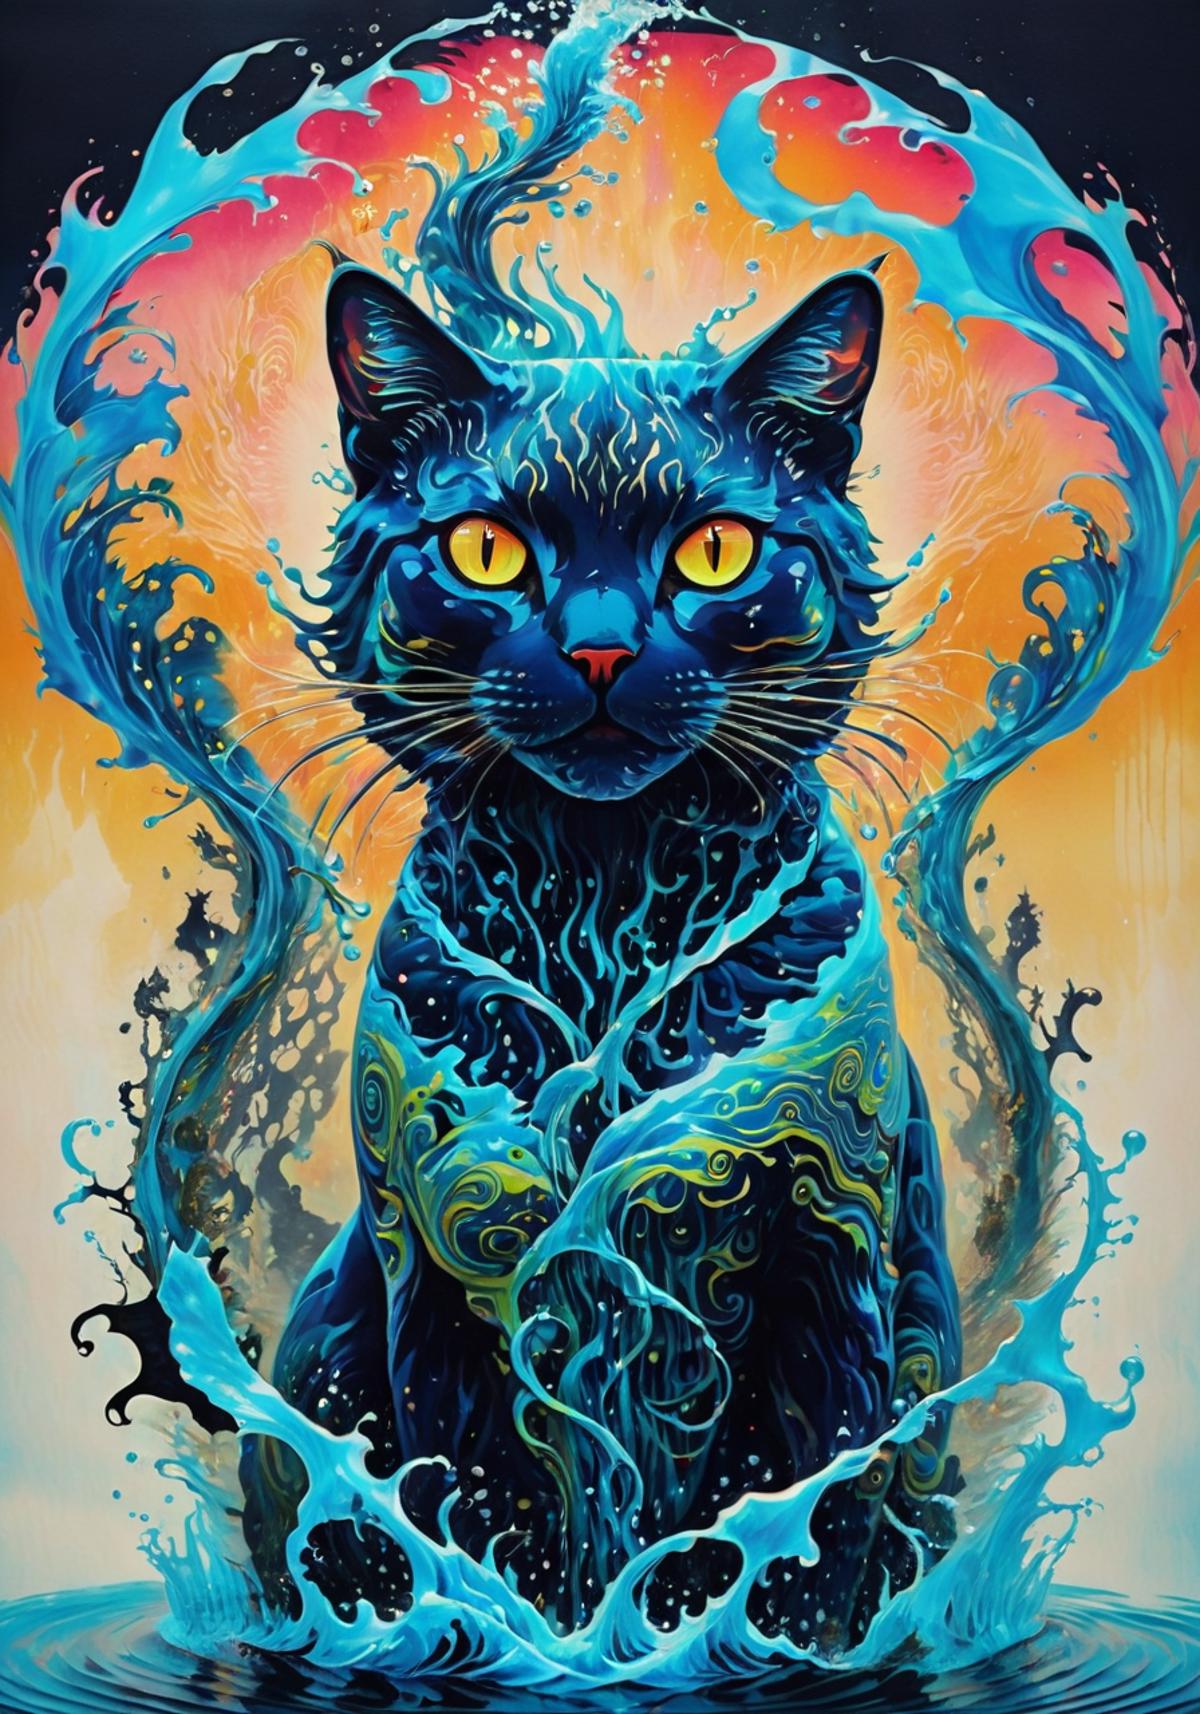 A blue cat with yellow eyes on a surreal background.